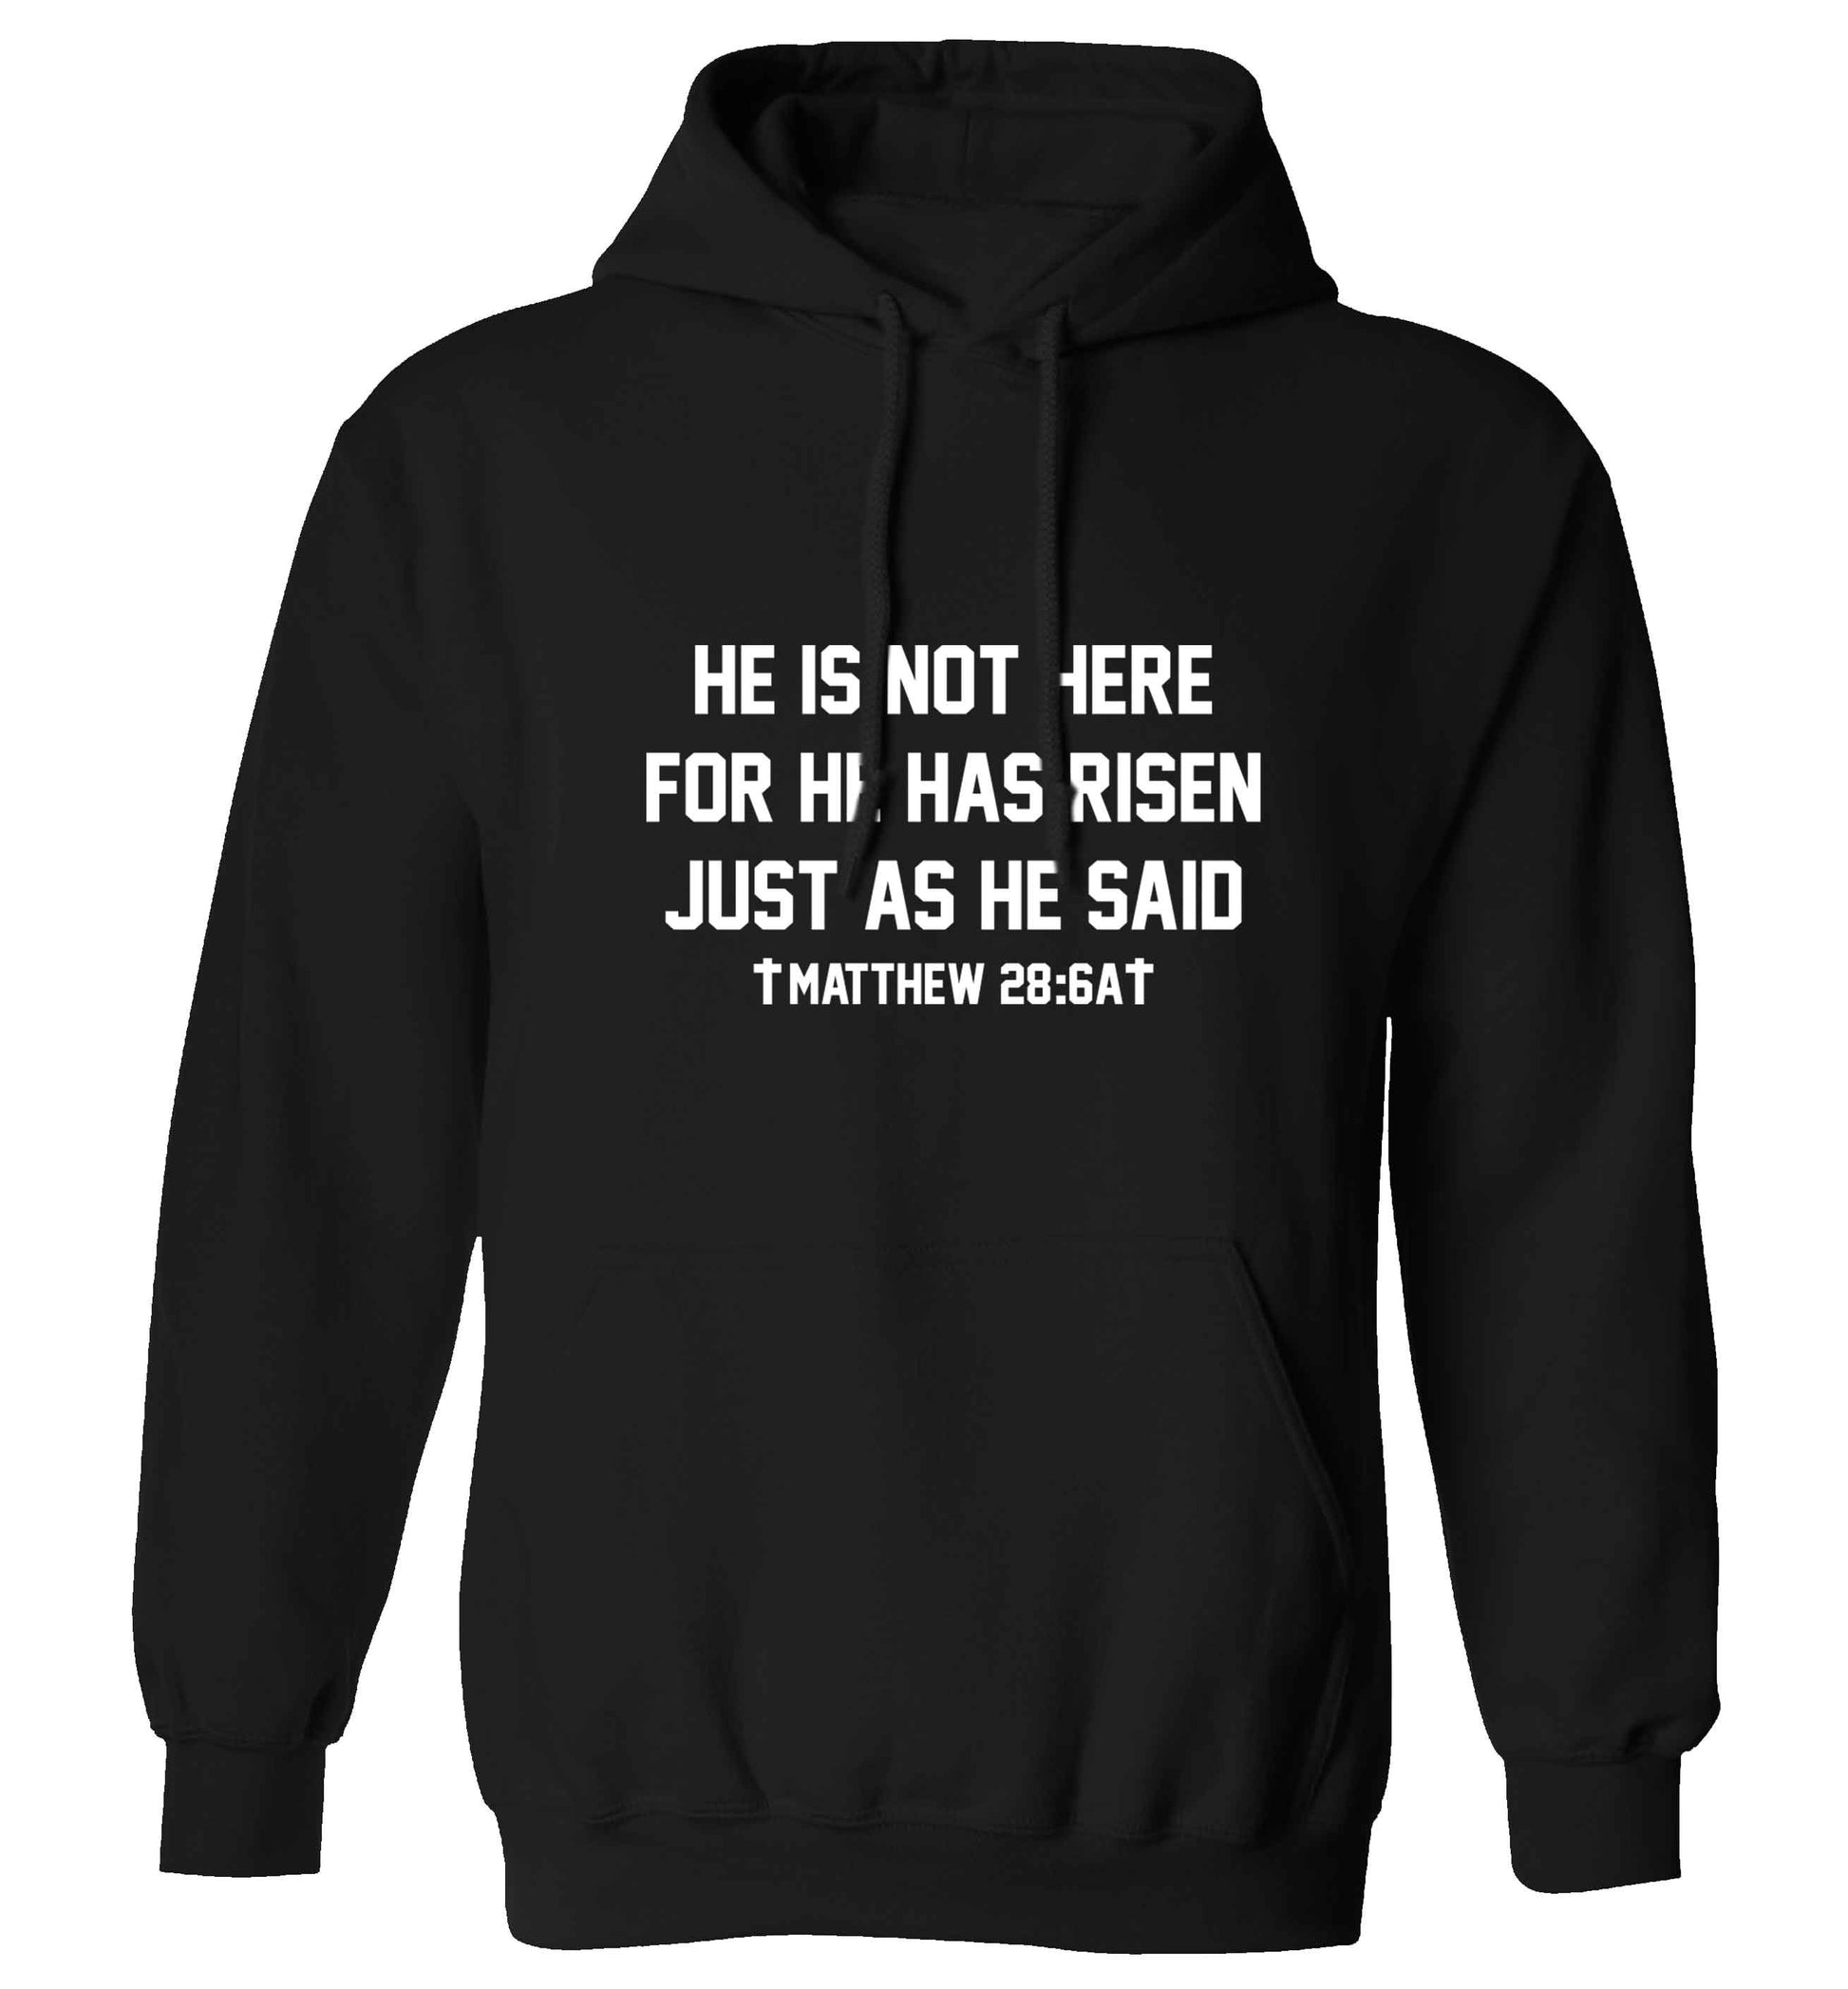 He is not here for he has risen just as he said matthew 28:6A adults unisex black hoodie 2XL